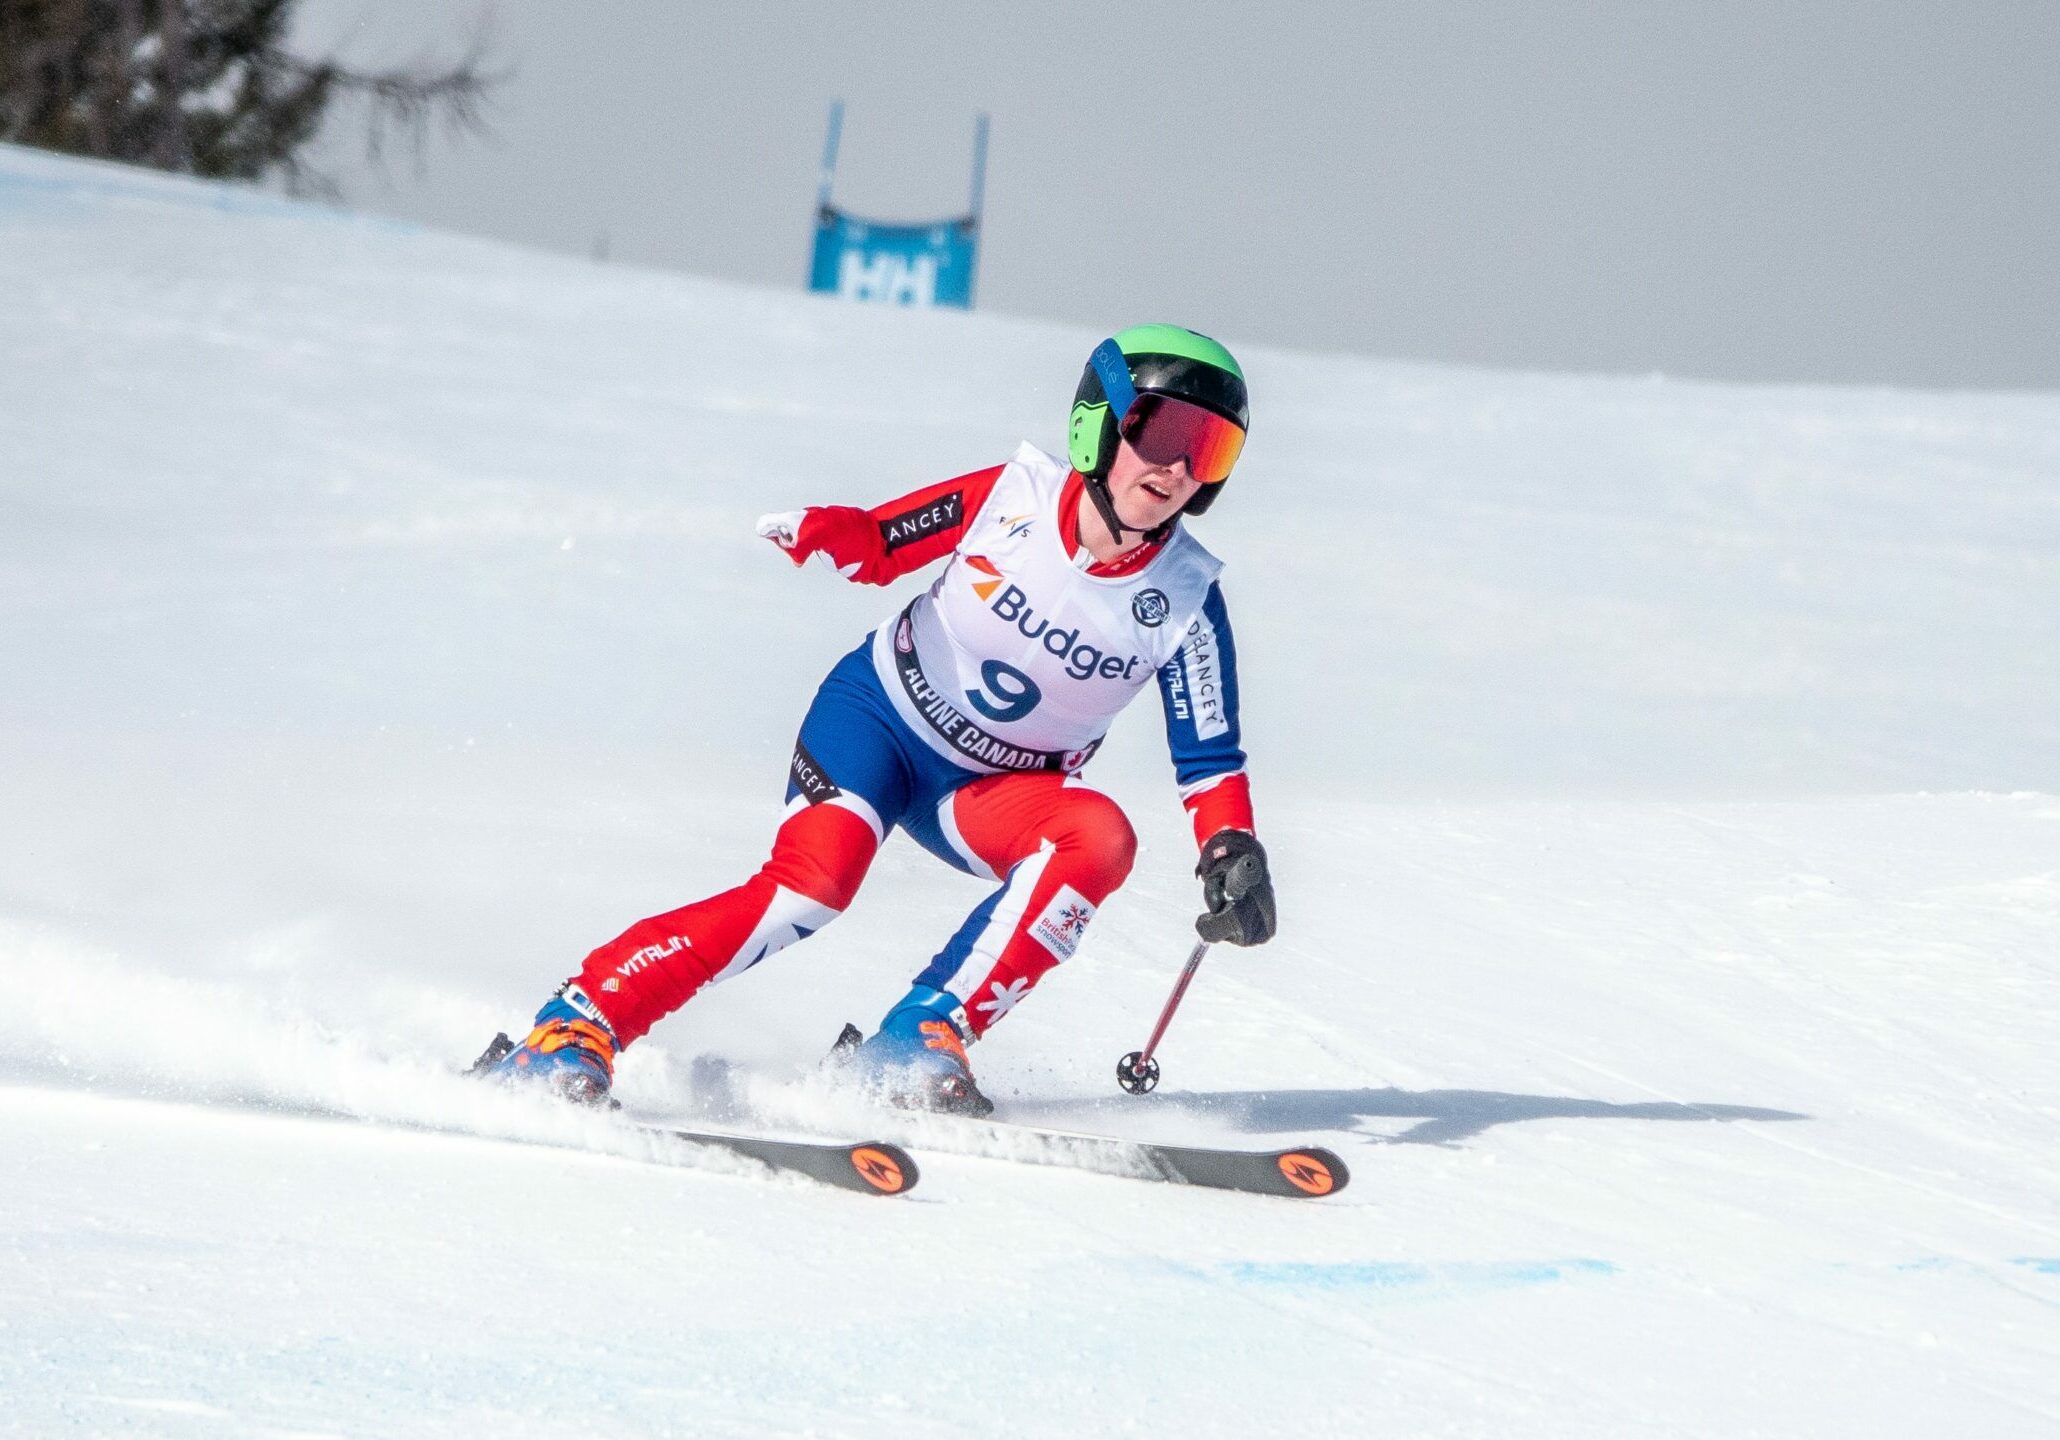 club member with cerebral palsy skiing and competing